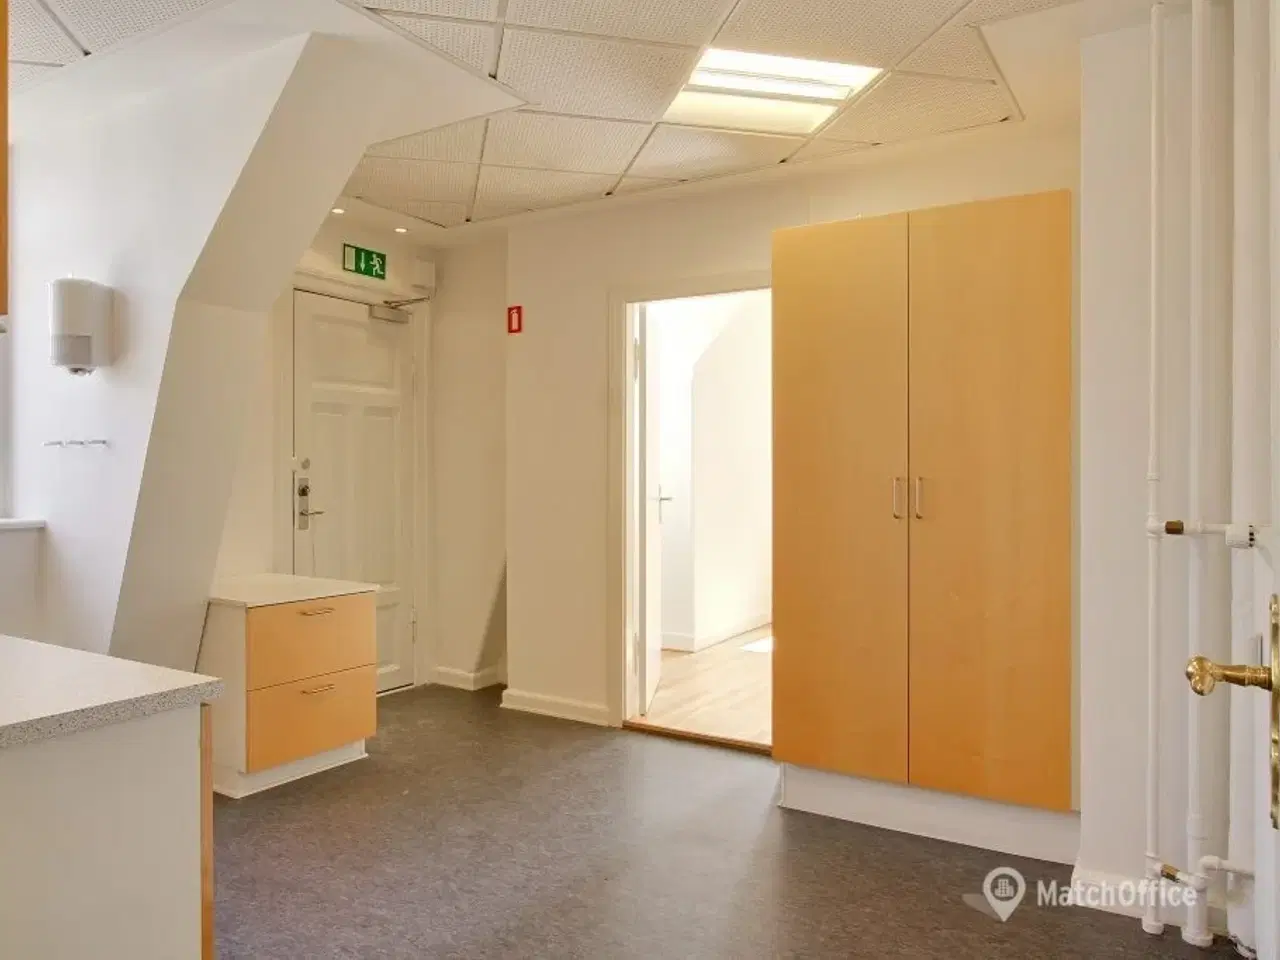 Billede 9 - Offices to rent in a perfectly located shared office space